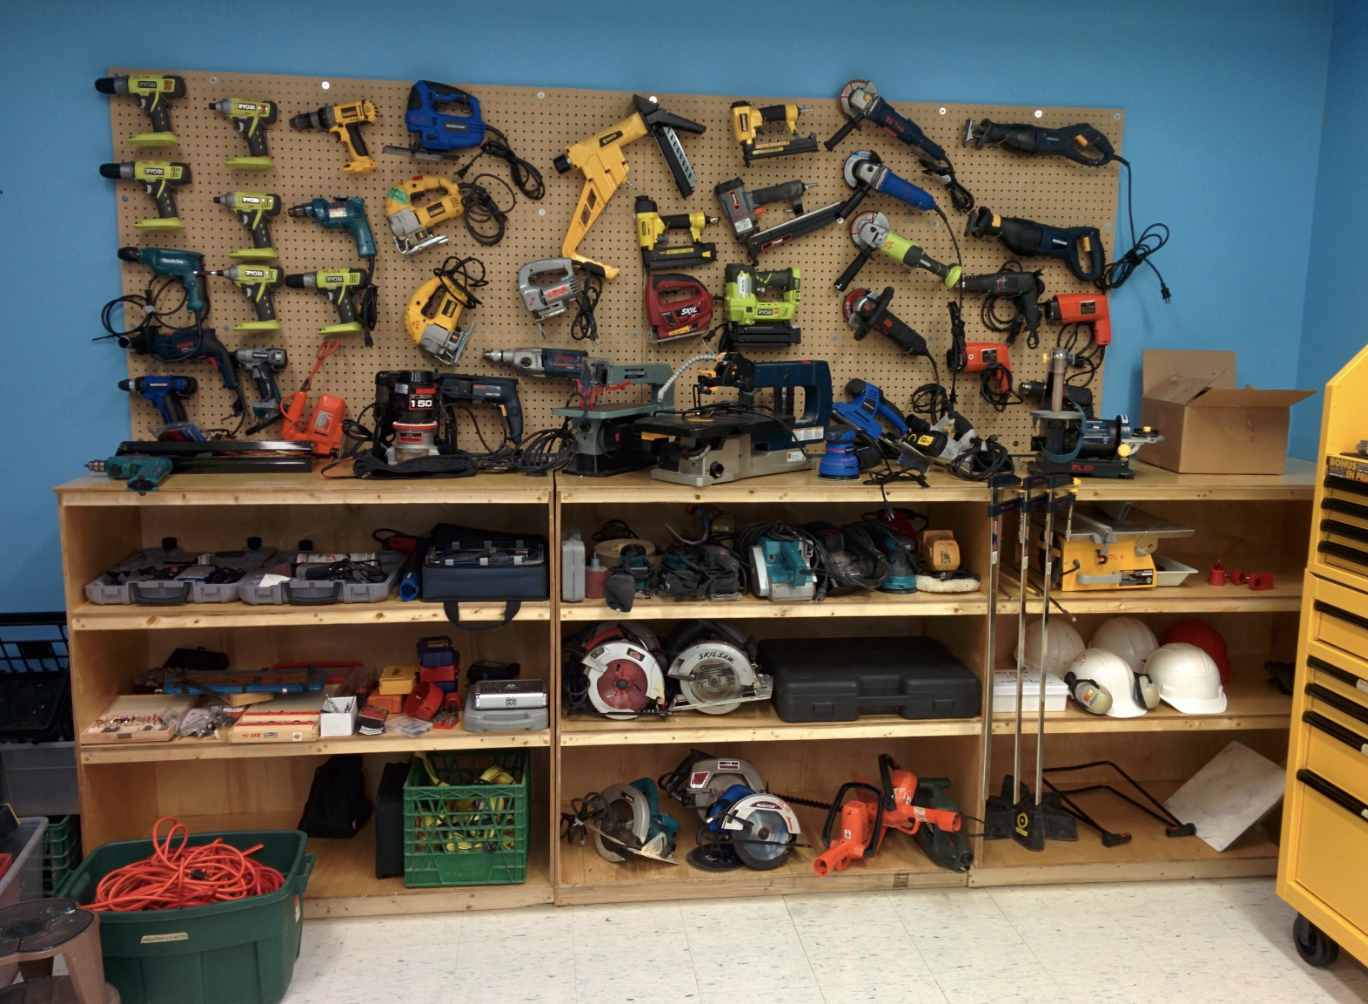 A wall and shelves in a workshop with various power tools and equipment neatly organized